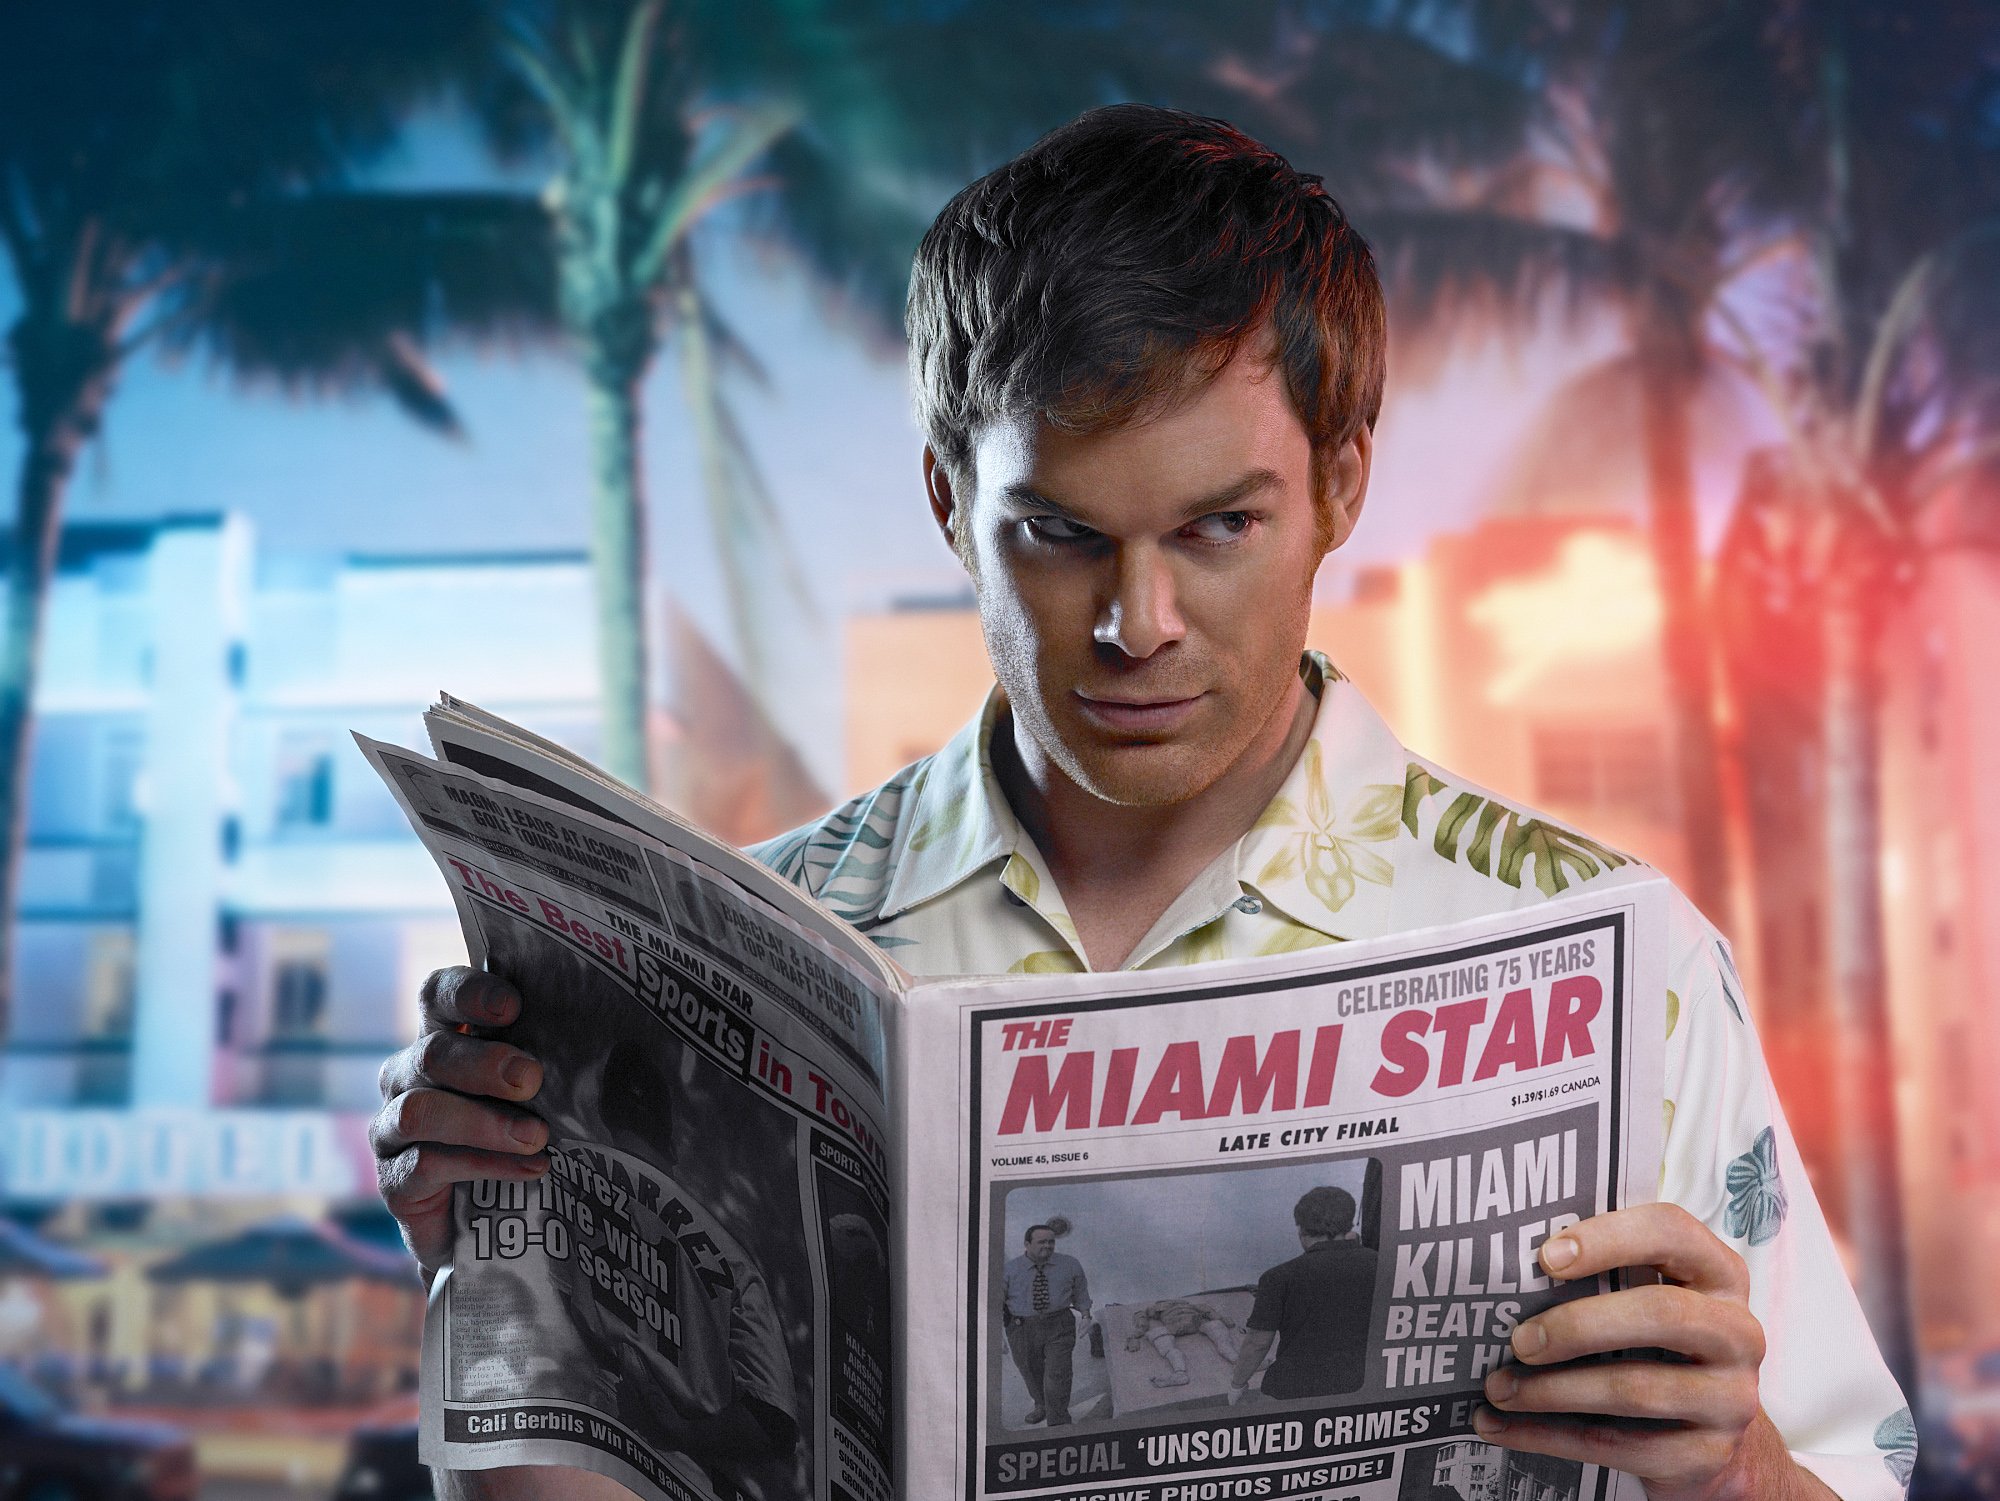 Dexter Morgan reads a newspaper while police car lights flash behind him. Fans had some mixed opinions about what happened to him in the Dexter: New Blood finale.